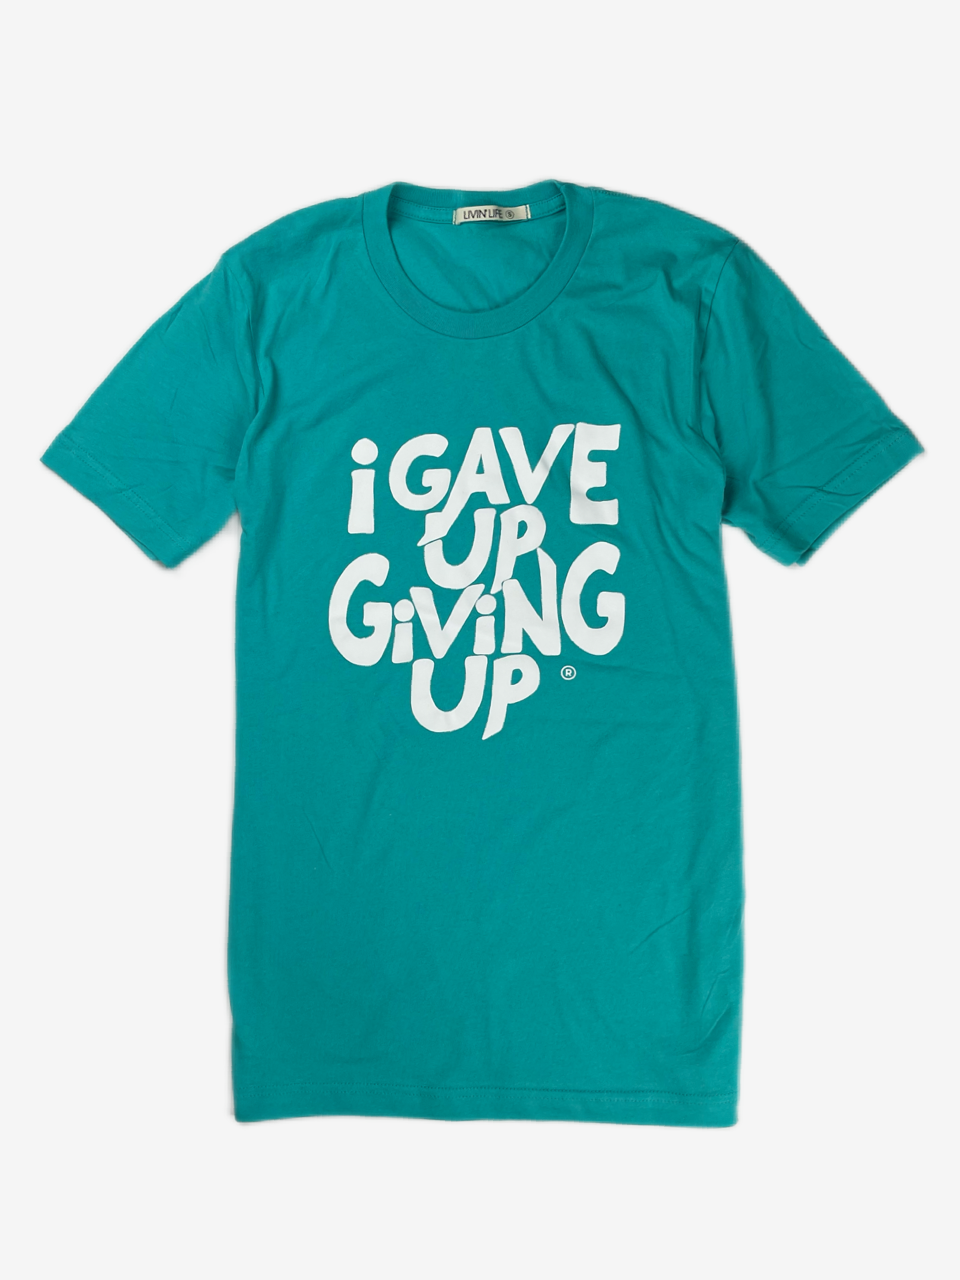 I Gave Up Giving Up® T-Shirt (Hydrate / White)